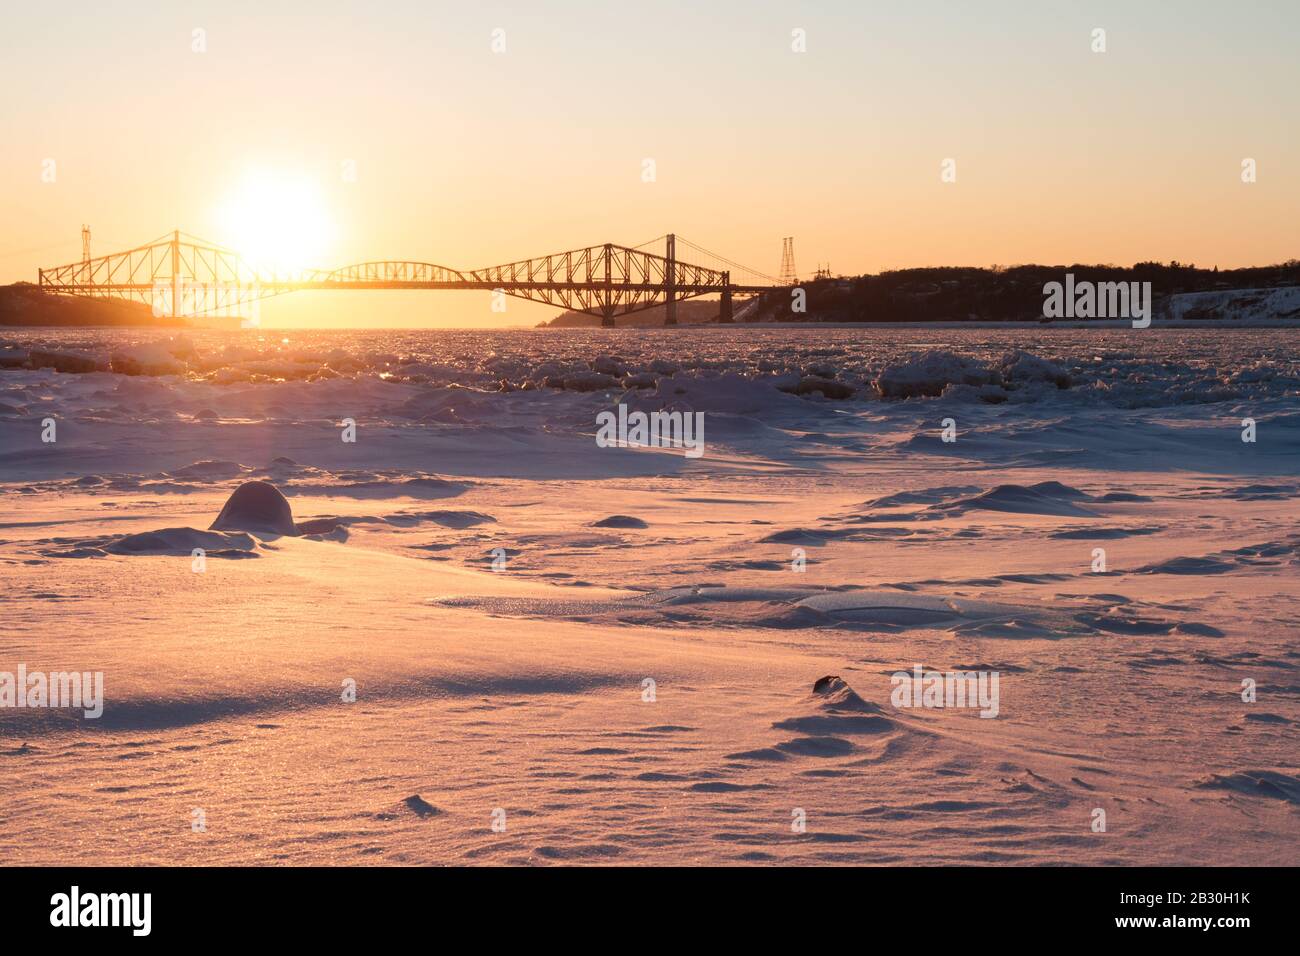 Old Quebec bridge in winter at sunset on beautiful day with clear sky. Snow and ice covering Saint-Lawrence River. Lévis, Qc. Canada Stock Photo